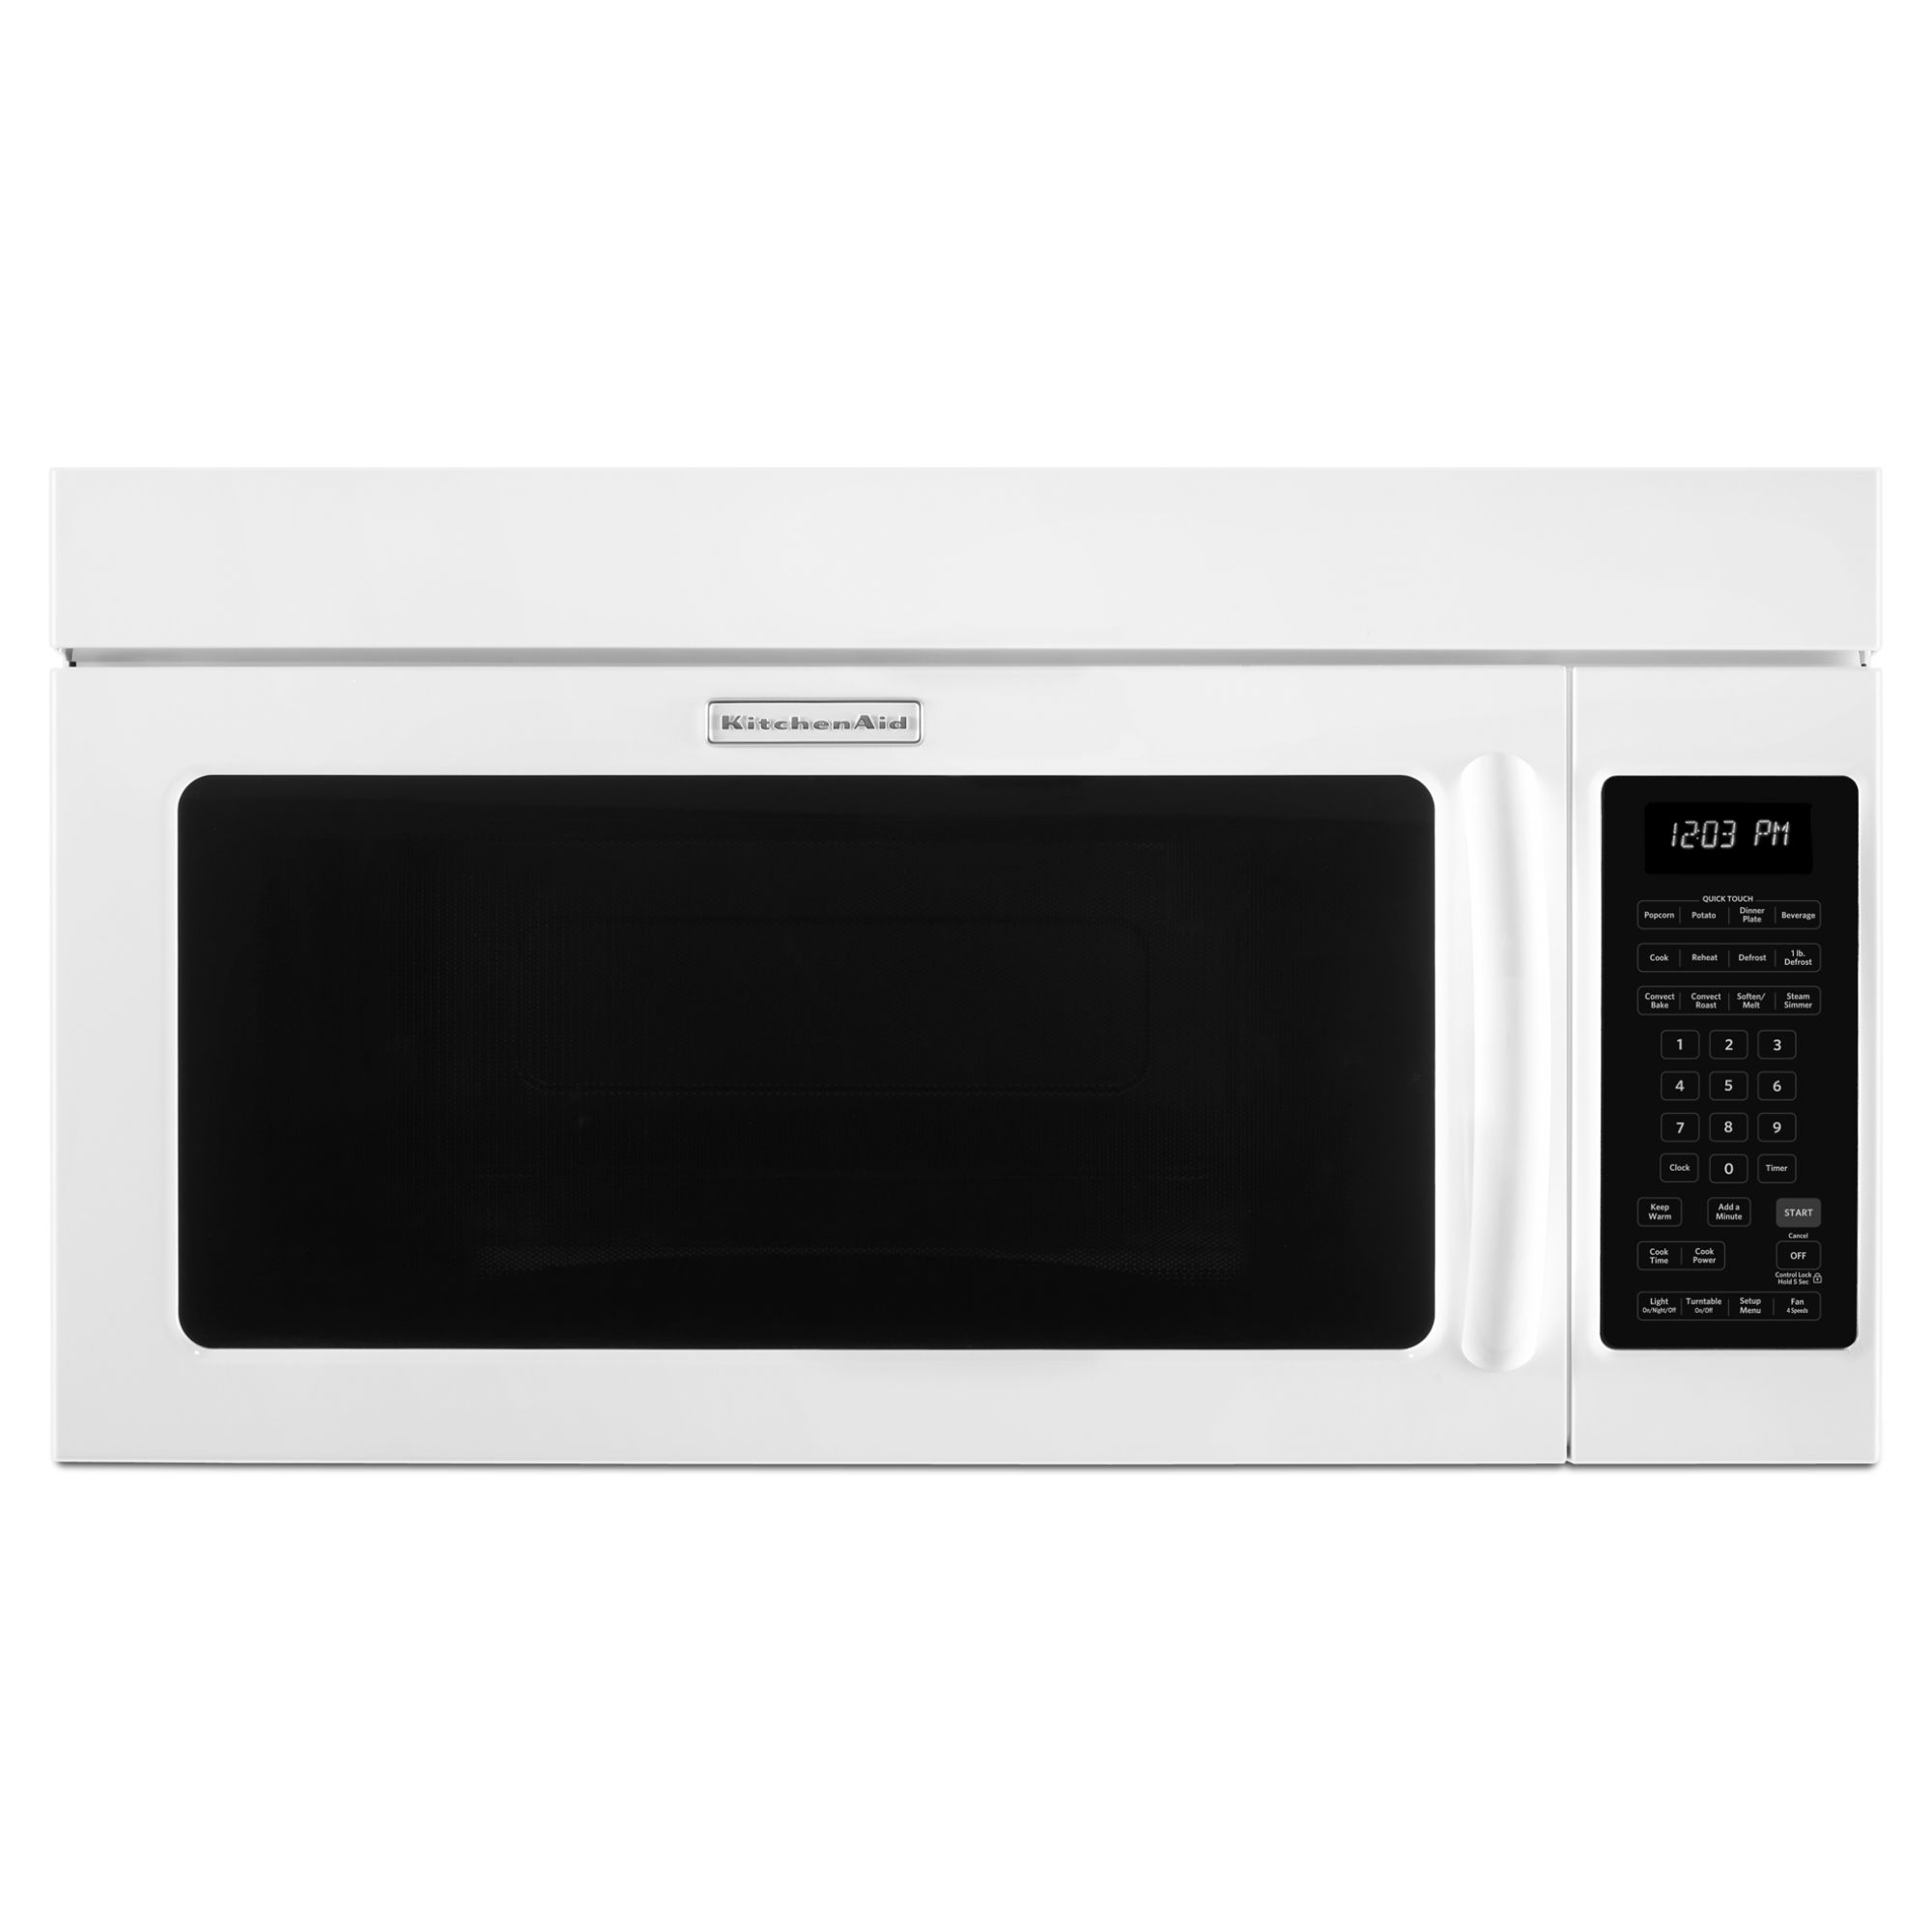 KitchenAid 1.8 cu. ft. Microwave Hood Combination Oven w/ Convection Cooking - White